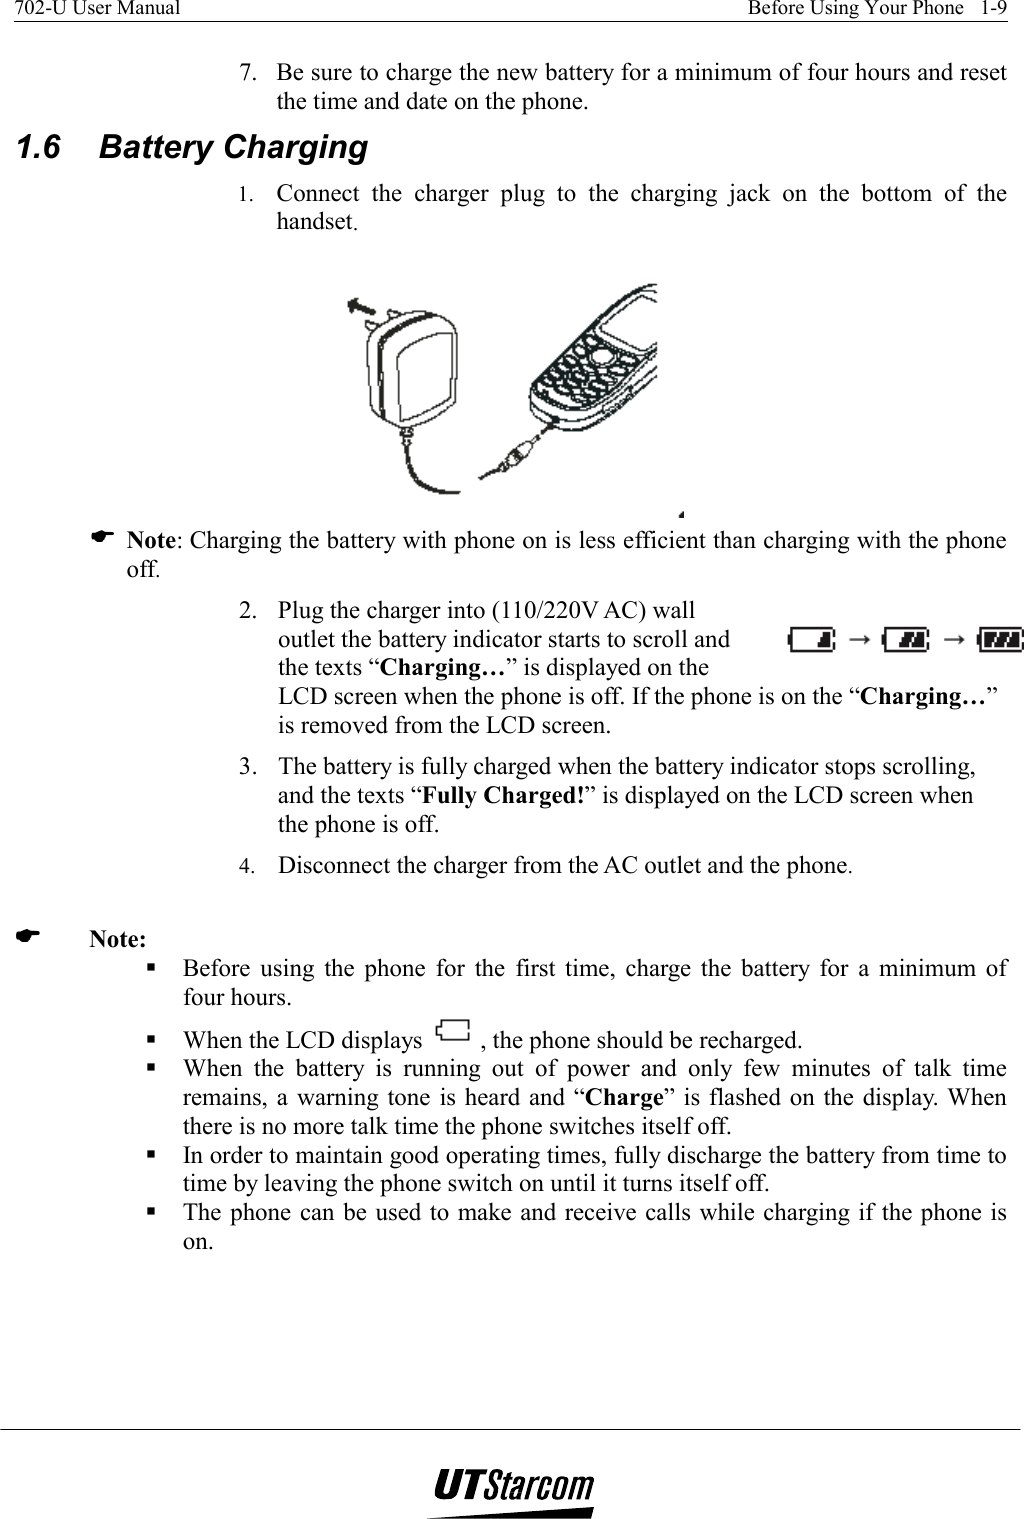 702-U User Manual    Before Using Your Phone   1-9   7.  Be sure to charge the new battery for a minimum of four hours and reset the time and date on the phone. 1.6   Battery Charging 1.  Connect the charger plug to the charging jack on the bottom of the handset.  ( Note: Charging the battery with phone on is less efficient than charging with the phone off. 2.  Plug the charger into (110/220V AC) wall outlet the battery indicator starts to scroll and the texts “Charging…” is displayed on the LCD screen when the phone is off. If the phone is on the “Charging…” is removed from the LCD screen. 3.  The battery is fully charged when the battery indicator stops scrolling, and the texts “Fully Charged!” is displayed on the LCD screen when the phone is off. 4.  Disconnect the charger from the AC outlet and the phone.  (((( Note:  Before using the phone for the first time, charge the battery for a minimum of four hours.  When the LCD displays  , the phone should be recharged.  When the battery is running out of power and only few minutes of talk time remains, a warning tone is heard and “Charge” is flashed on the display. When there is no more talk time the phone switches itself off.  In order to maintain good operating times, fully discharge the battery from time to time by leaving the phone switch on until it turns itself off.  The phone can be used to make and receive calls while charging if the phone is on. 